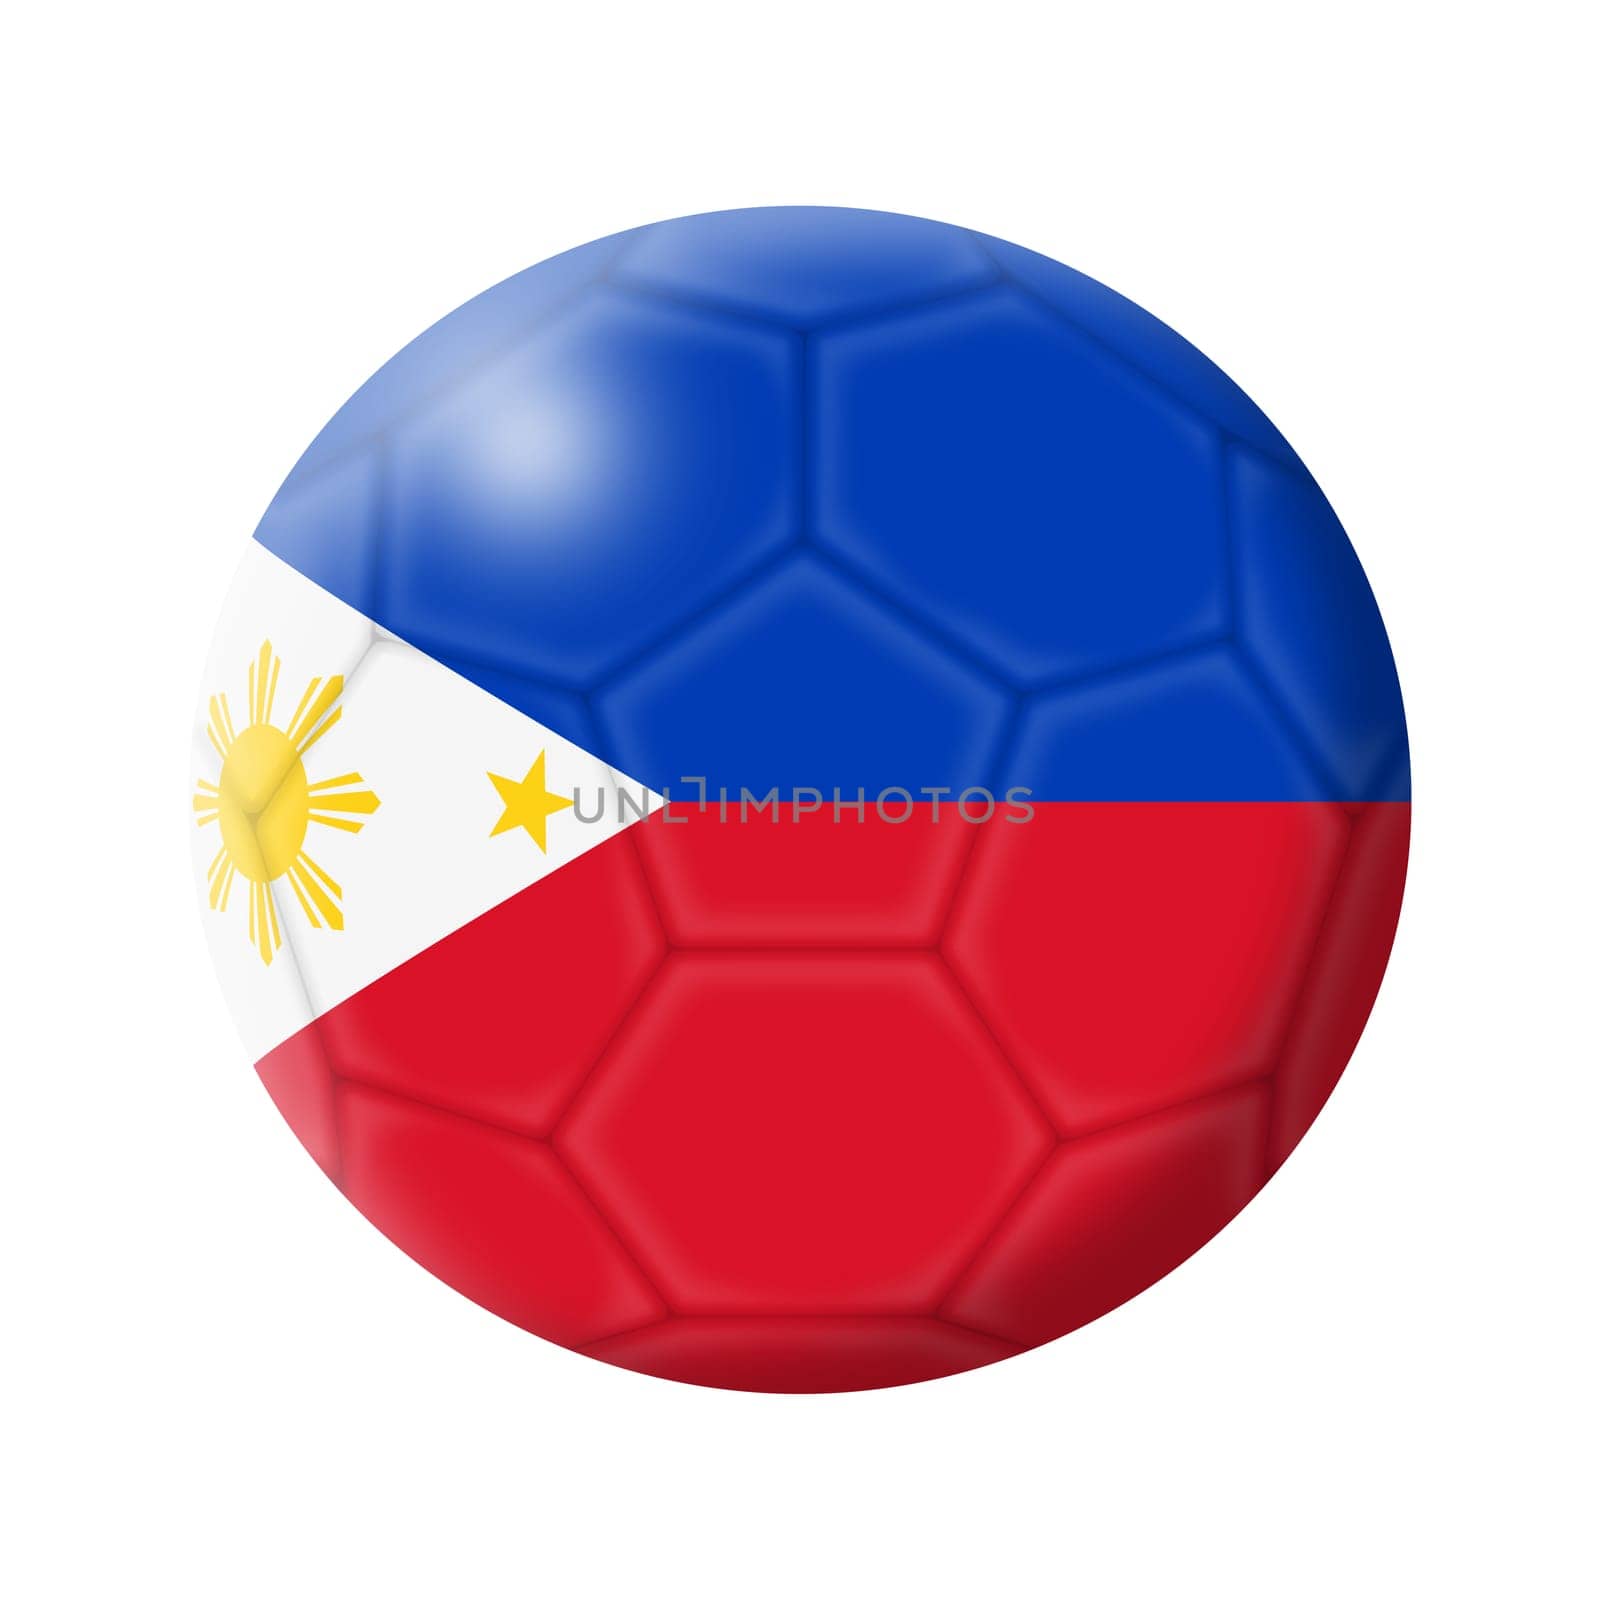 A Philippines soccer ball football 3d illustration isolated on white with clipping path